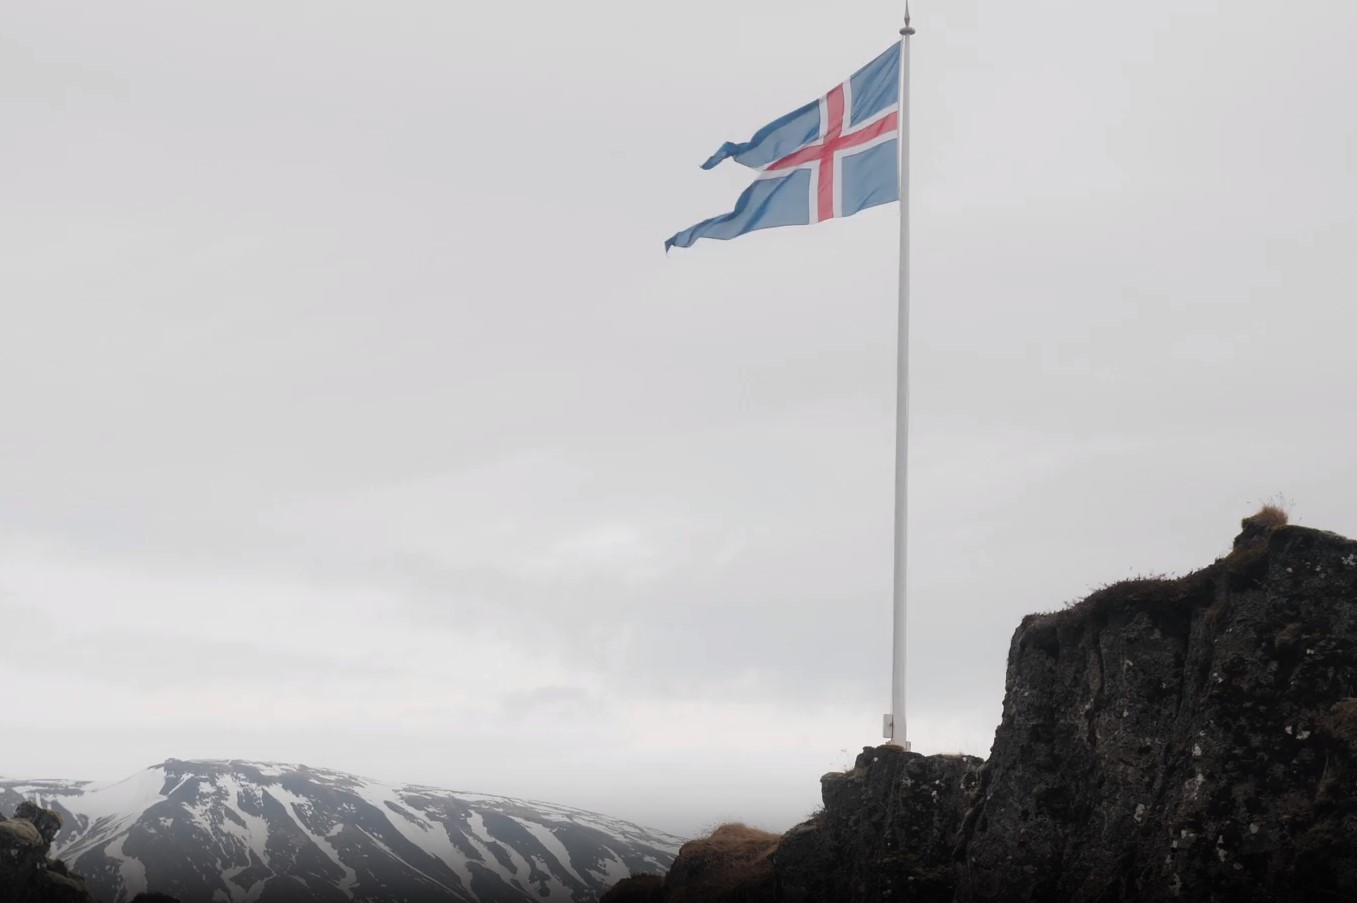 How wealthy is Iceland